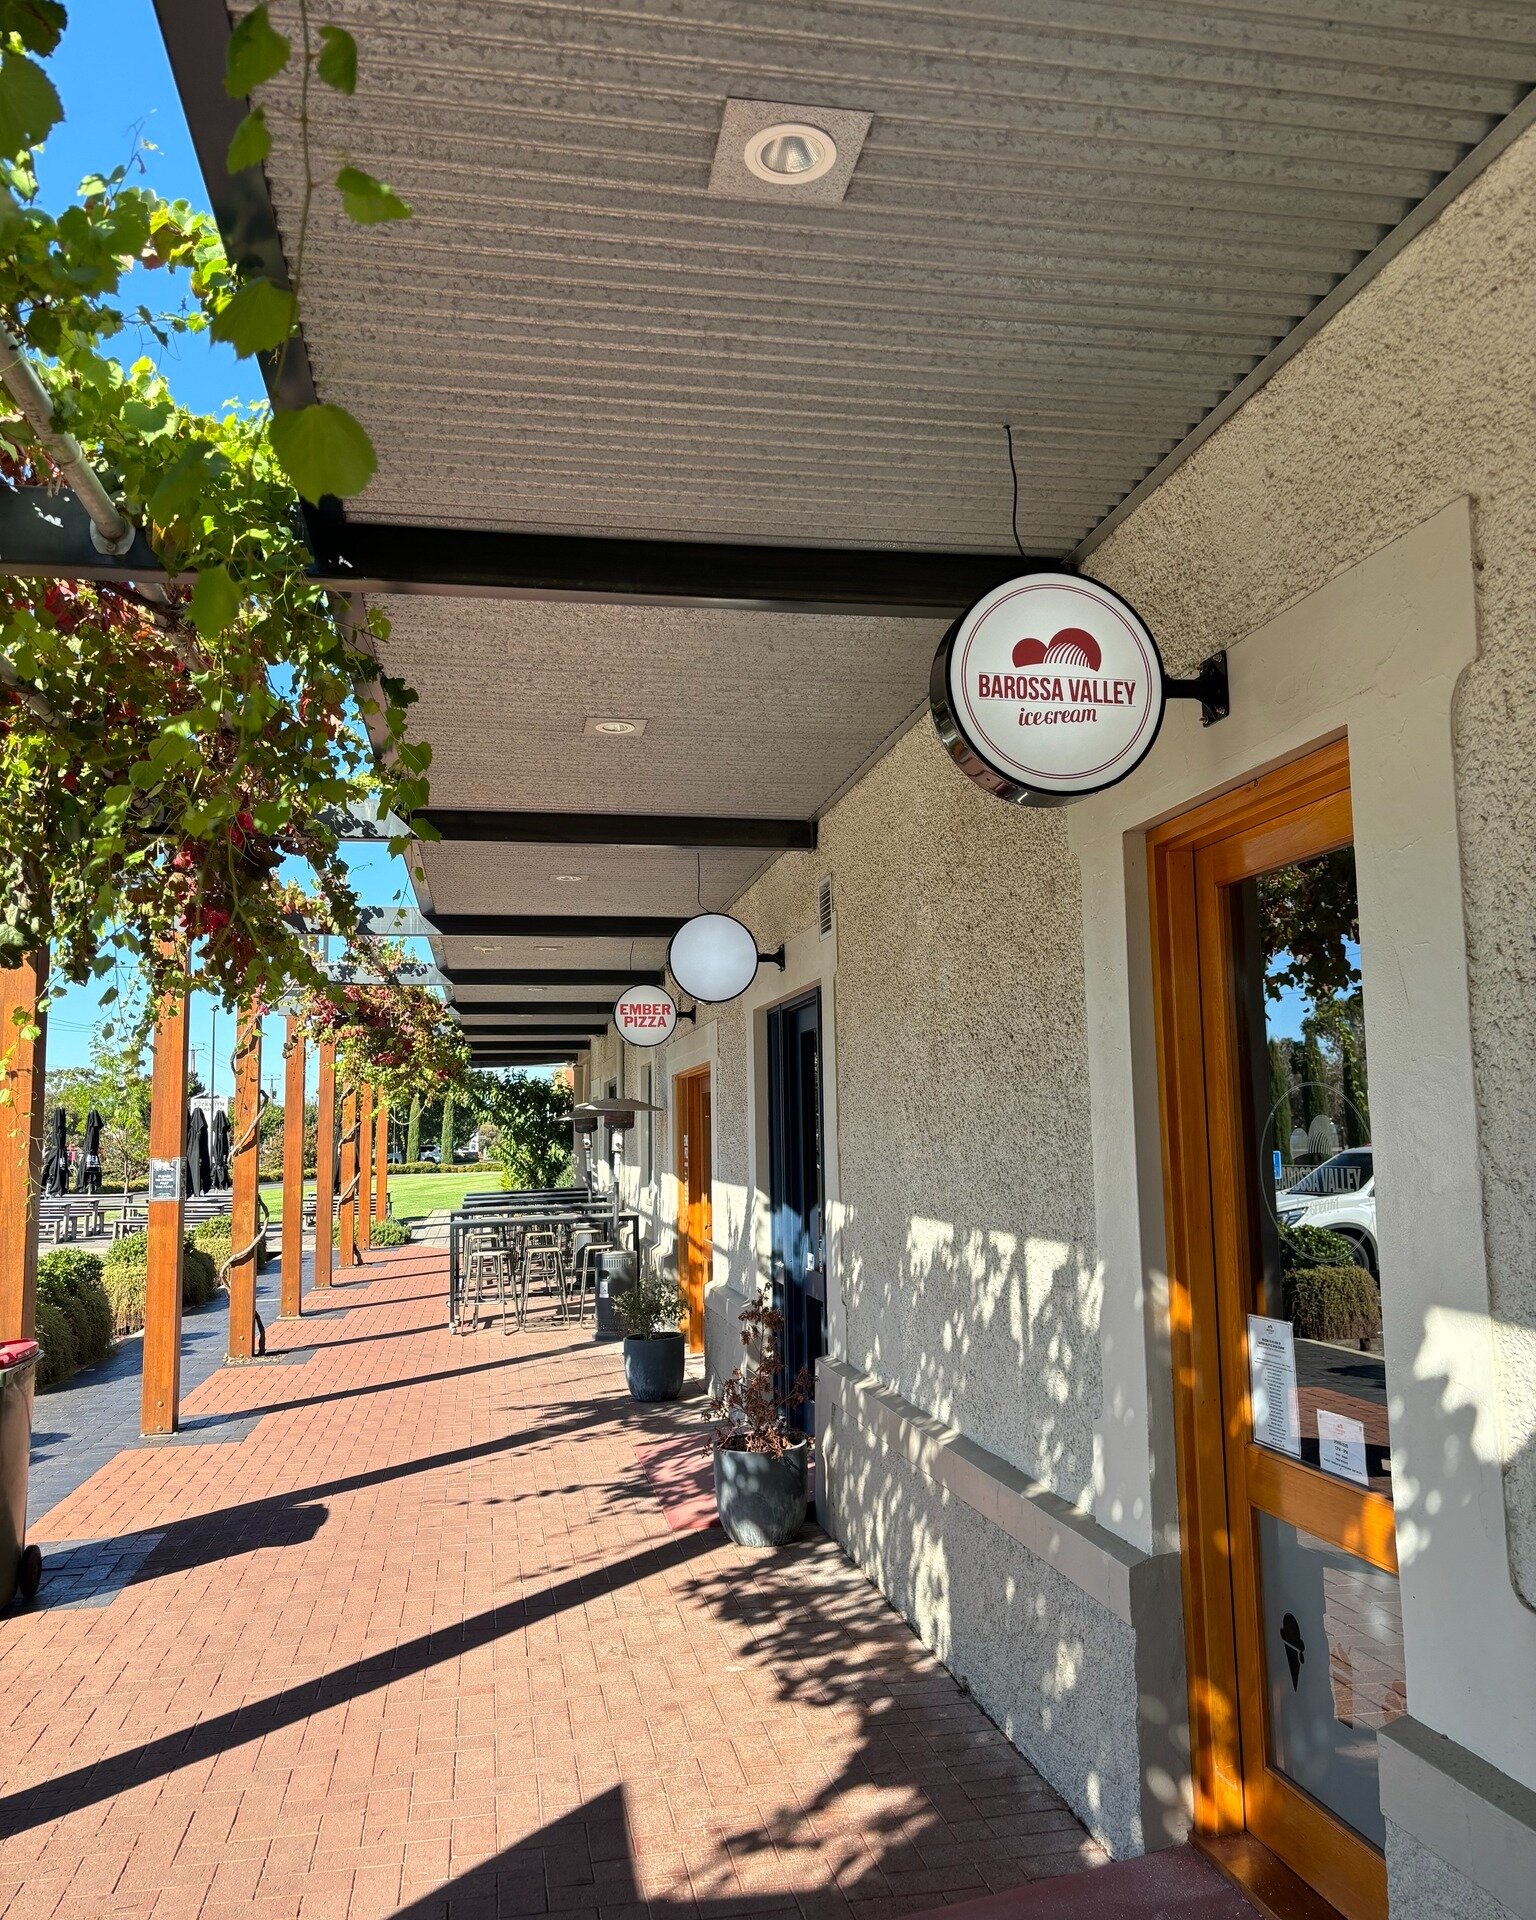 It's a beautiful day at Provenance! ☀️ Why not pop into @barossa_valley_ice_cream for an after-school treat? Or swing by @barossadistillingco or @steinstaphouse for a cheeky knockoff drink? Either way, don't forget to check out our new signage while 